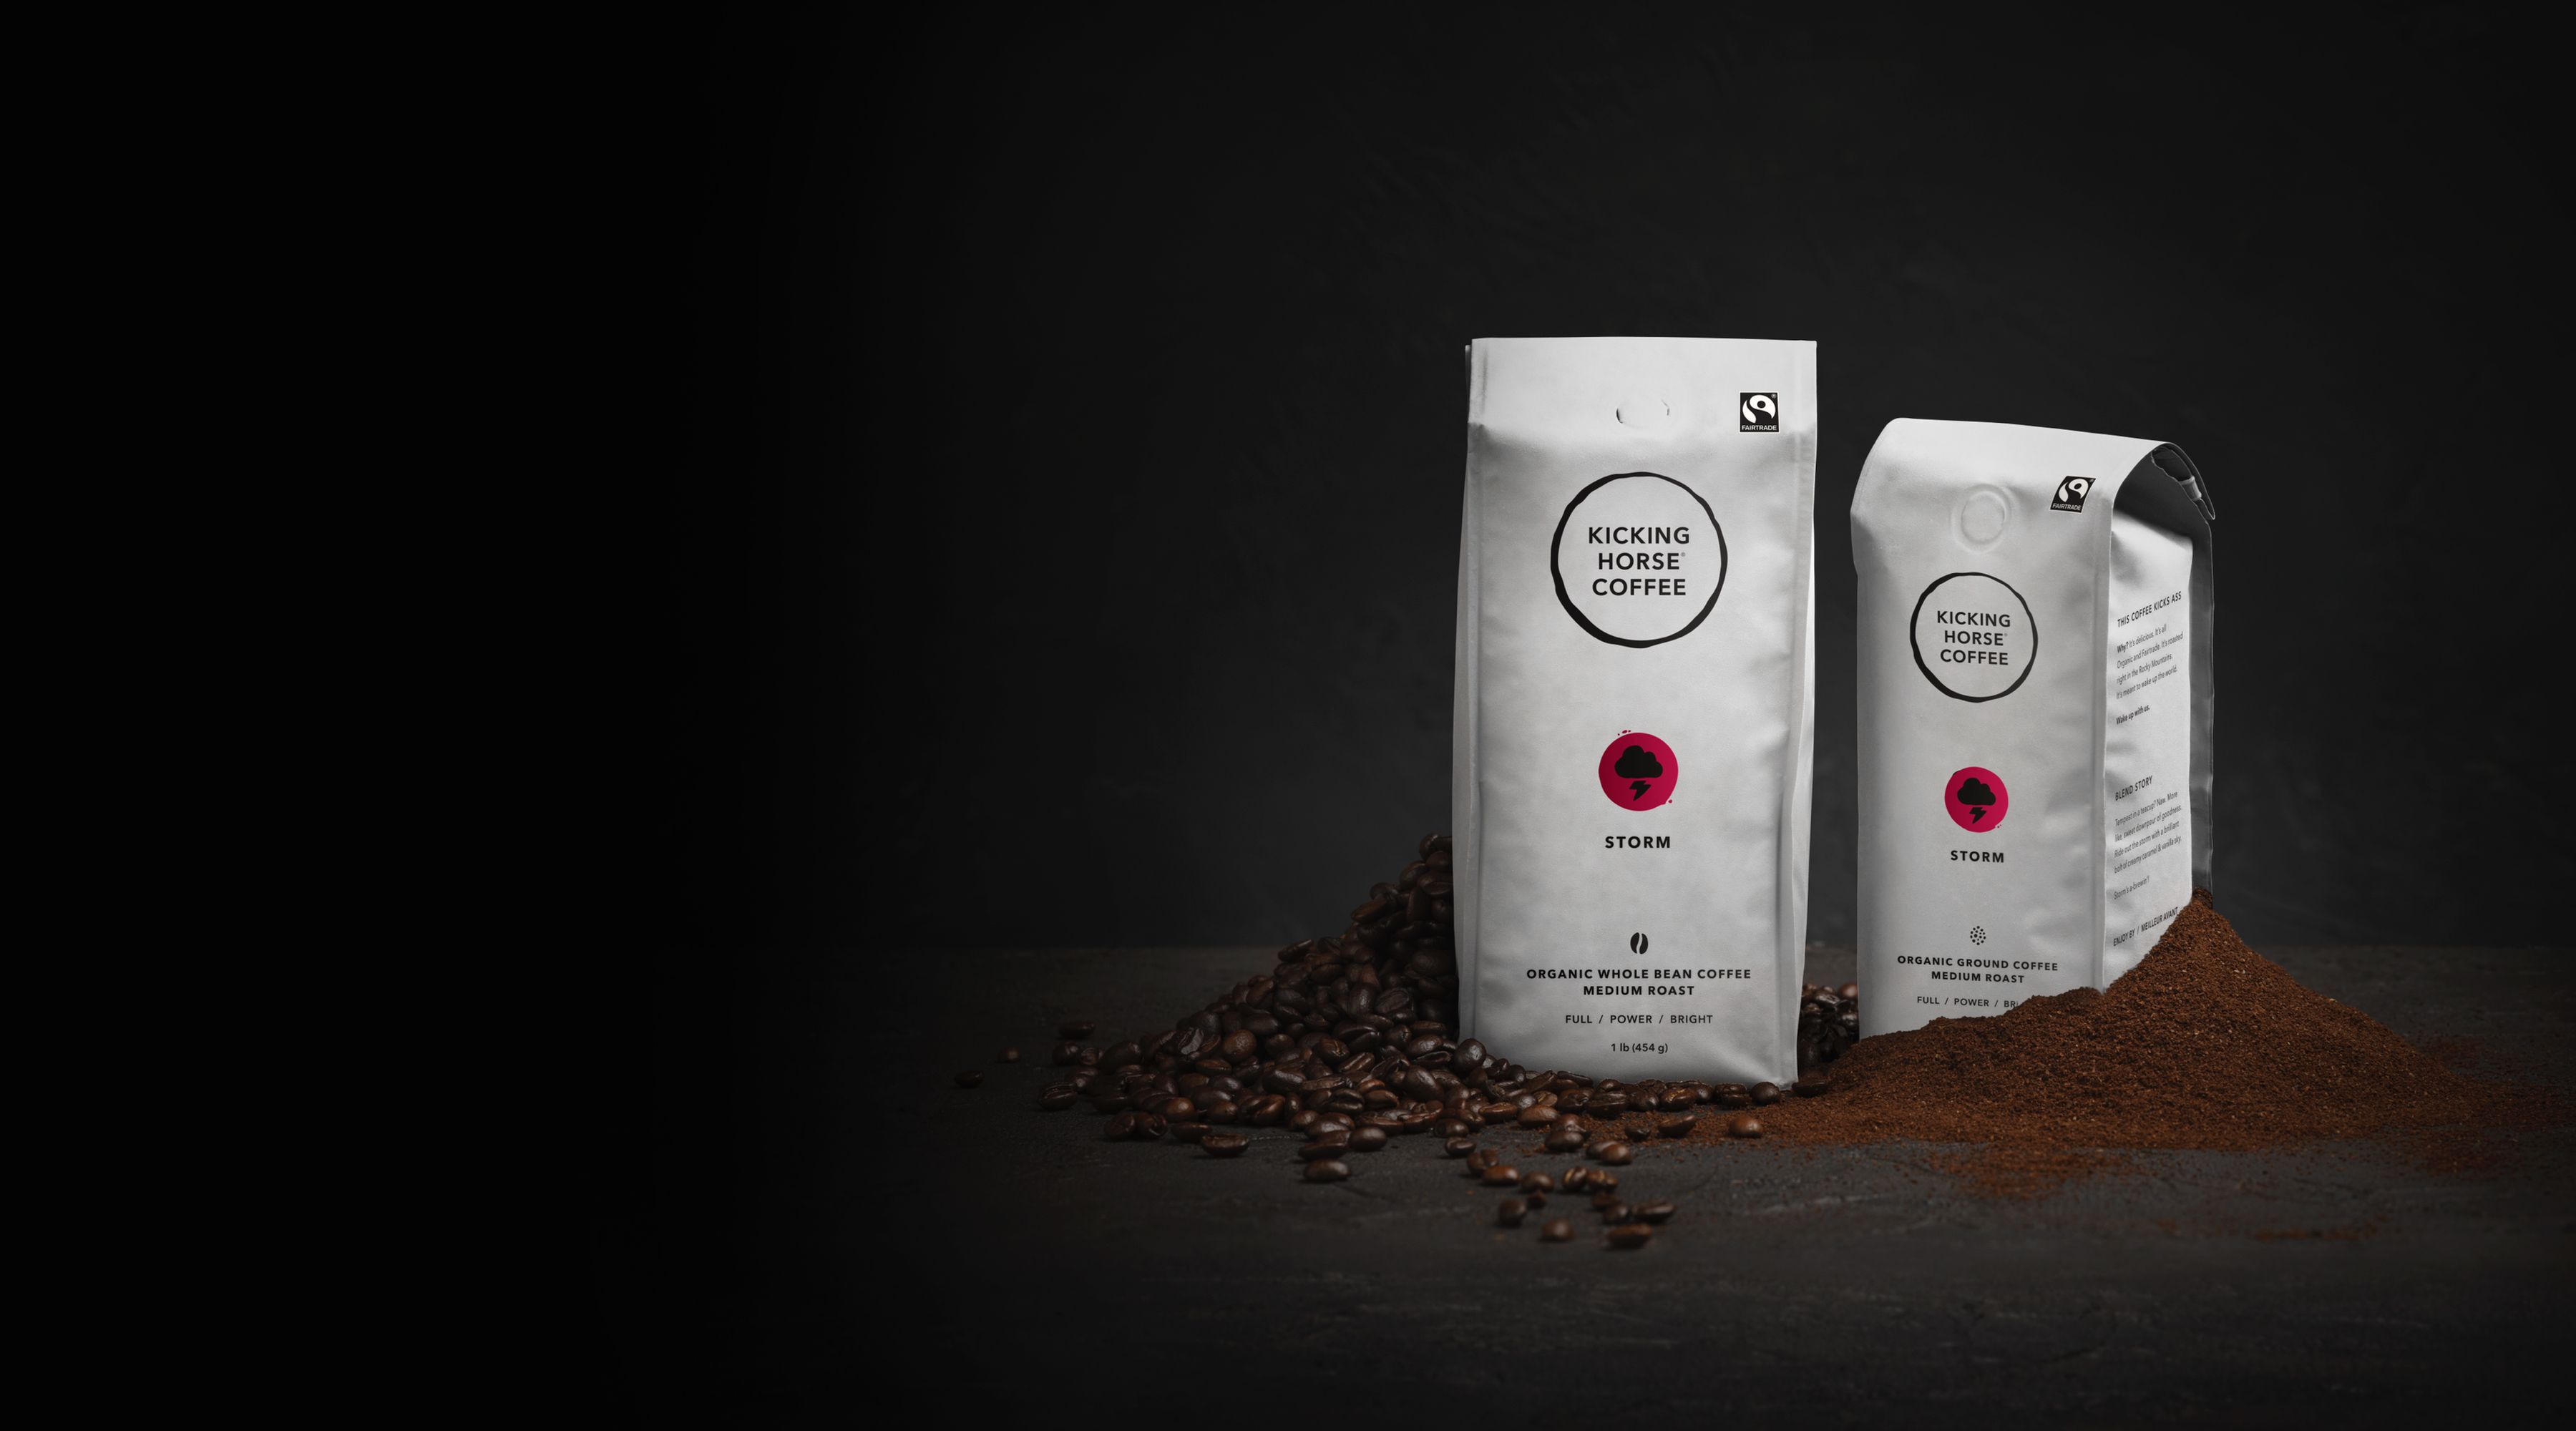 Kicking horse coffee Limited edition coffee storm